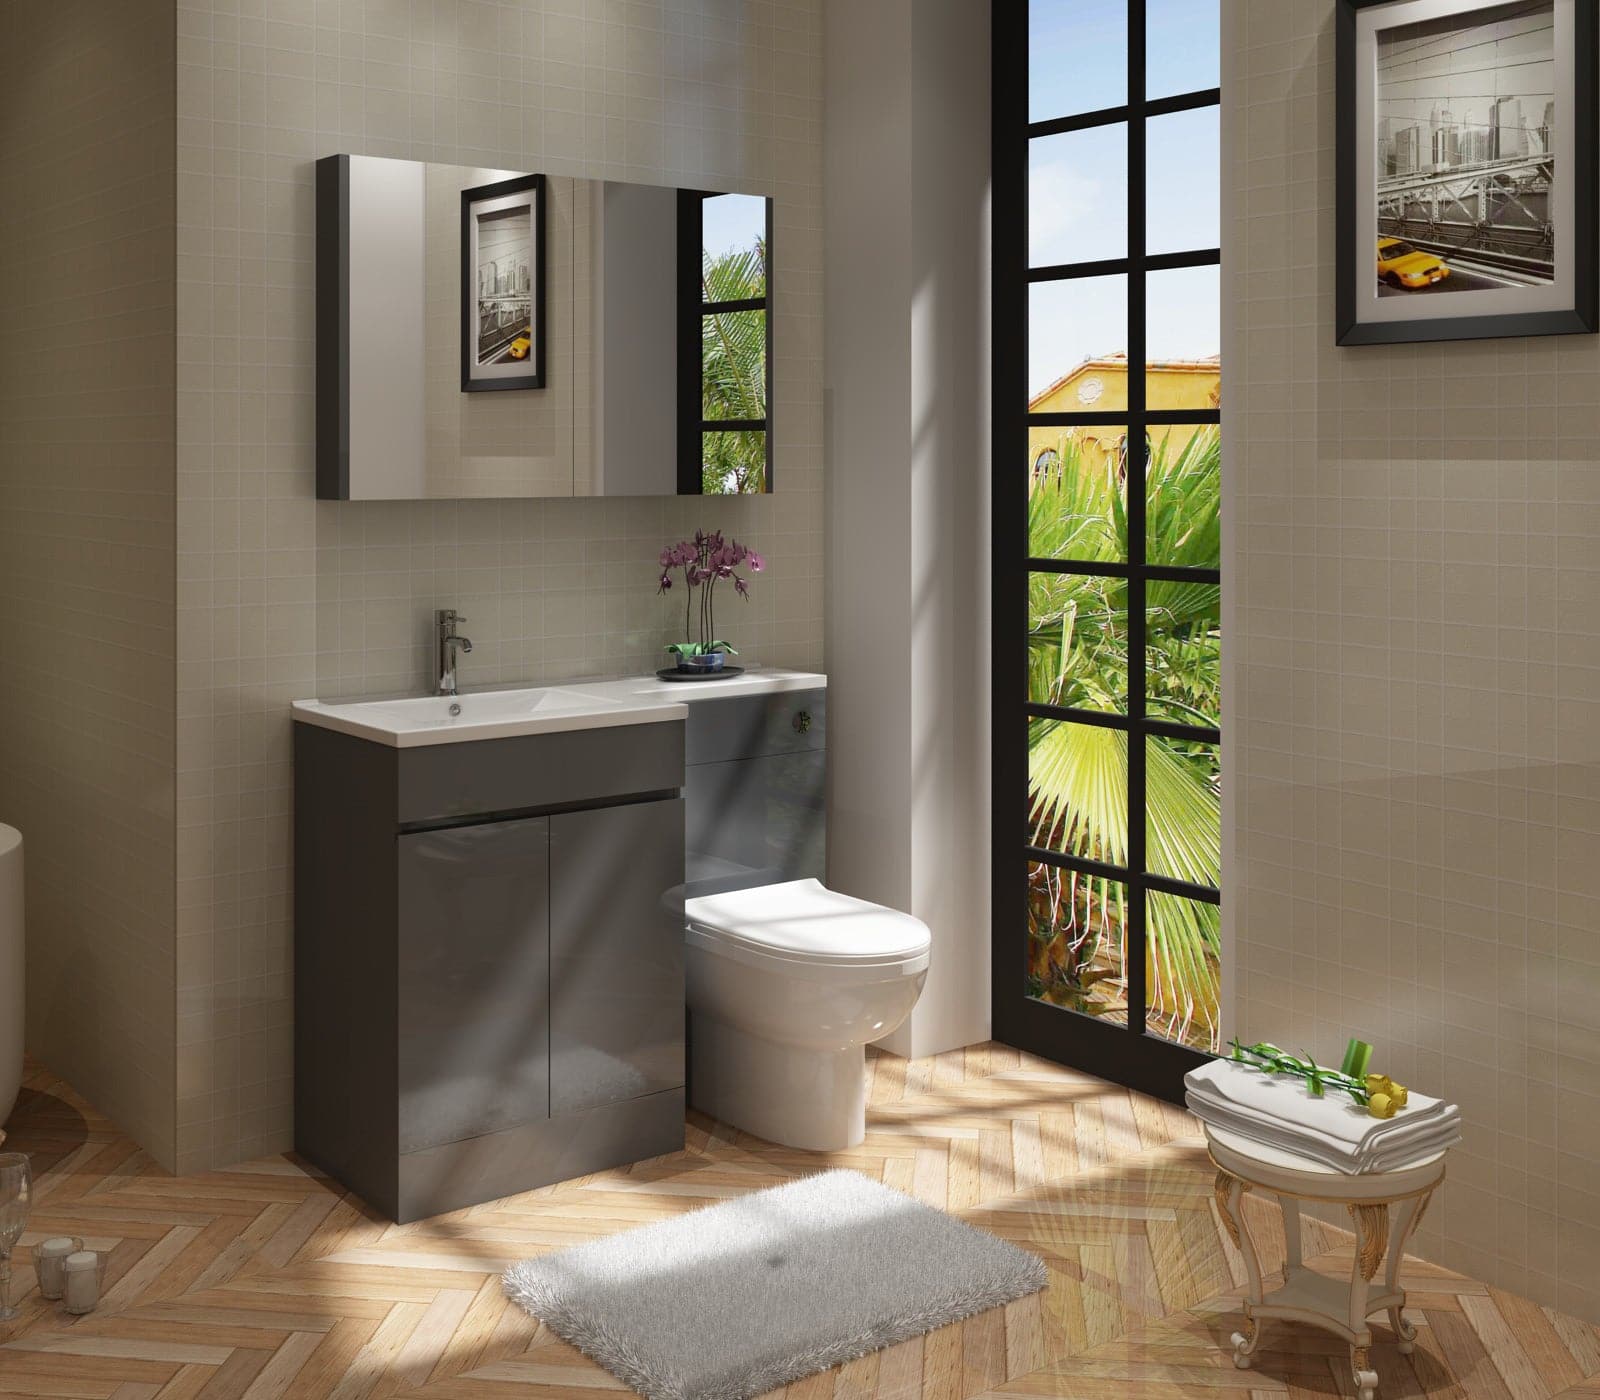 Gamma L Shape Vanity & WC Unit with Toilet - LH - Anthracite Grey, modern bathroom furniture, space-saving design, UK quality.